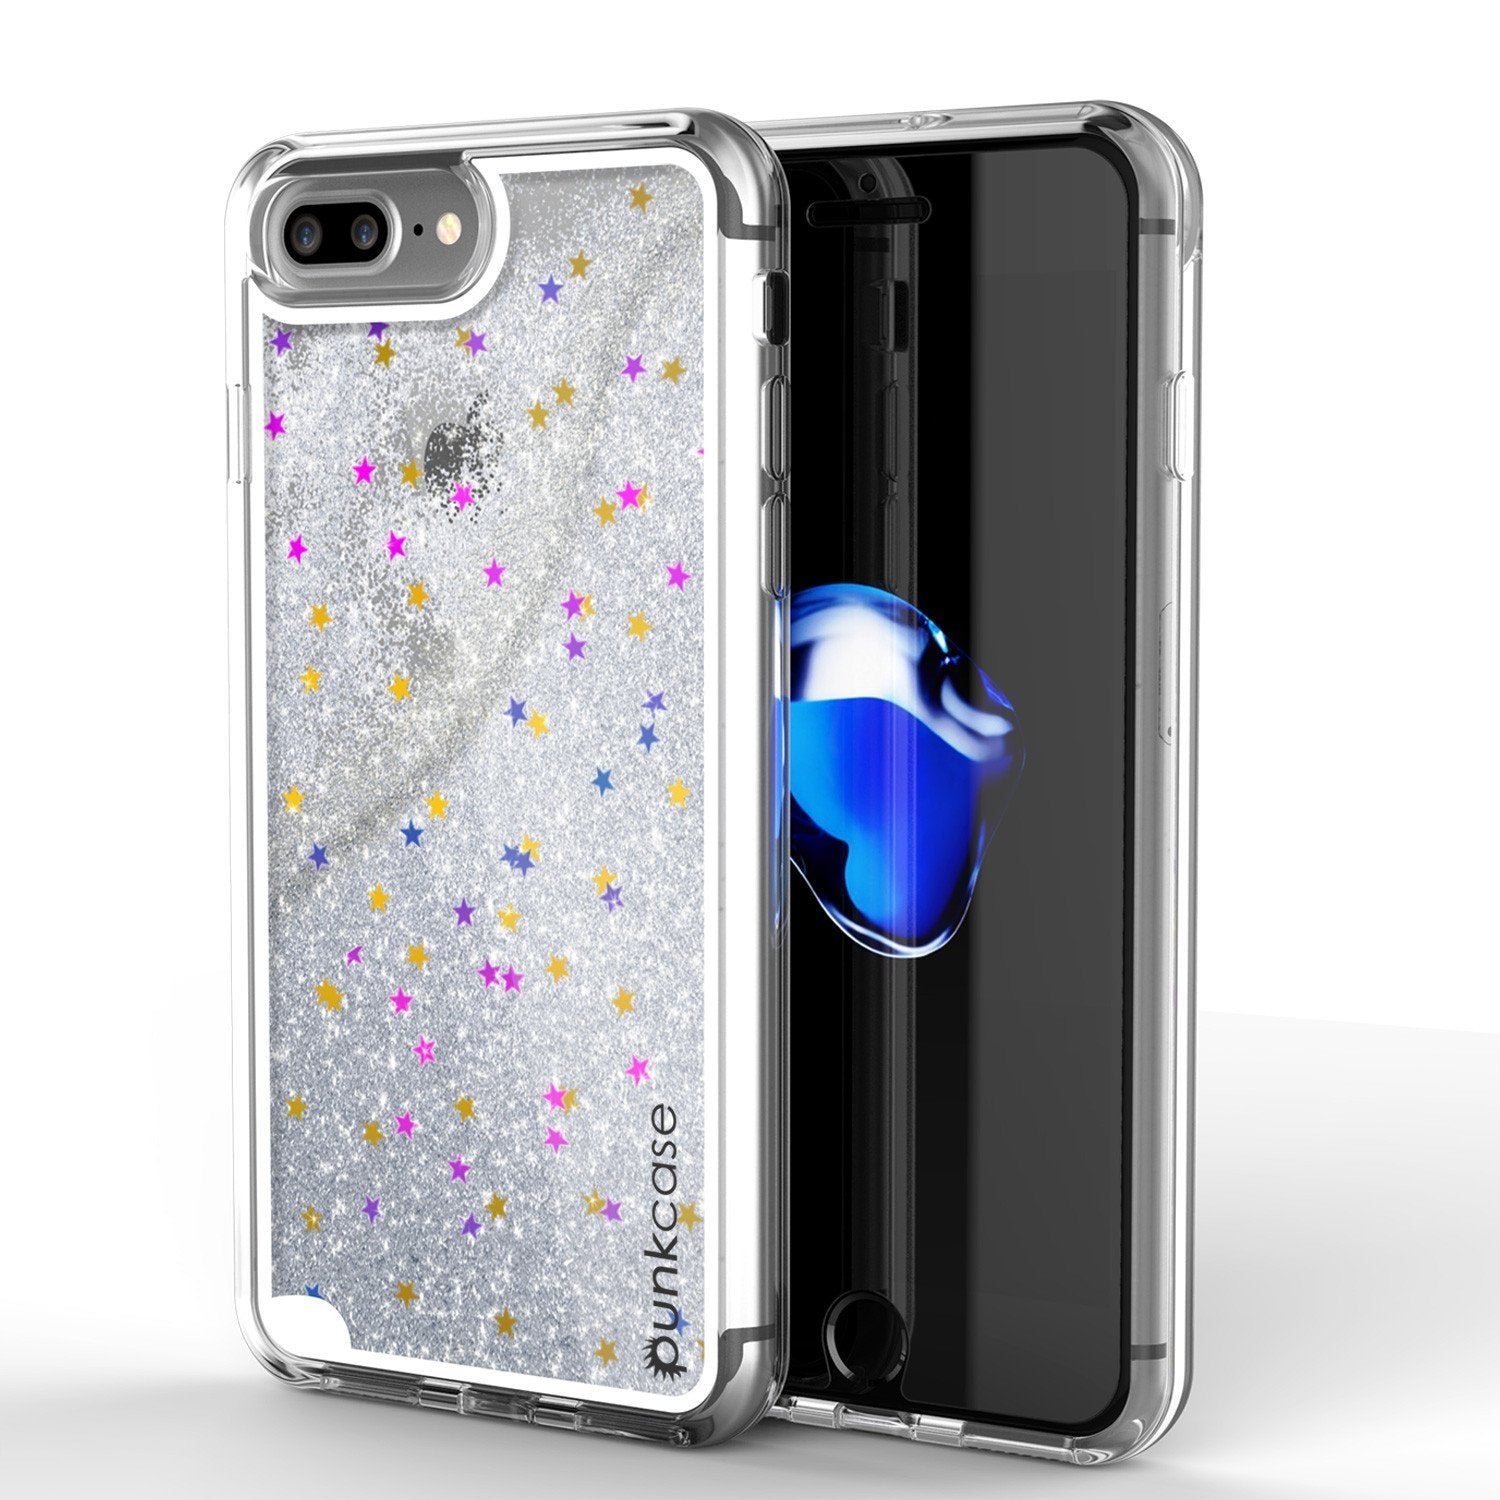 iPhone 8+ Plus Case, PunkCase LIQUID Silver Series, Protective Dual Layer Floating Glitter Cover - PunkCase NZ